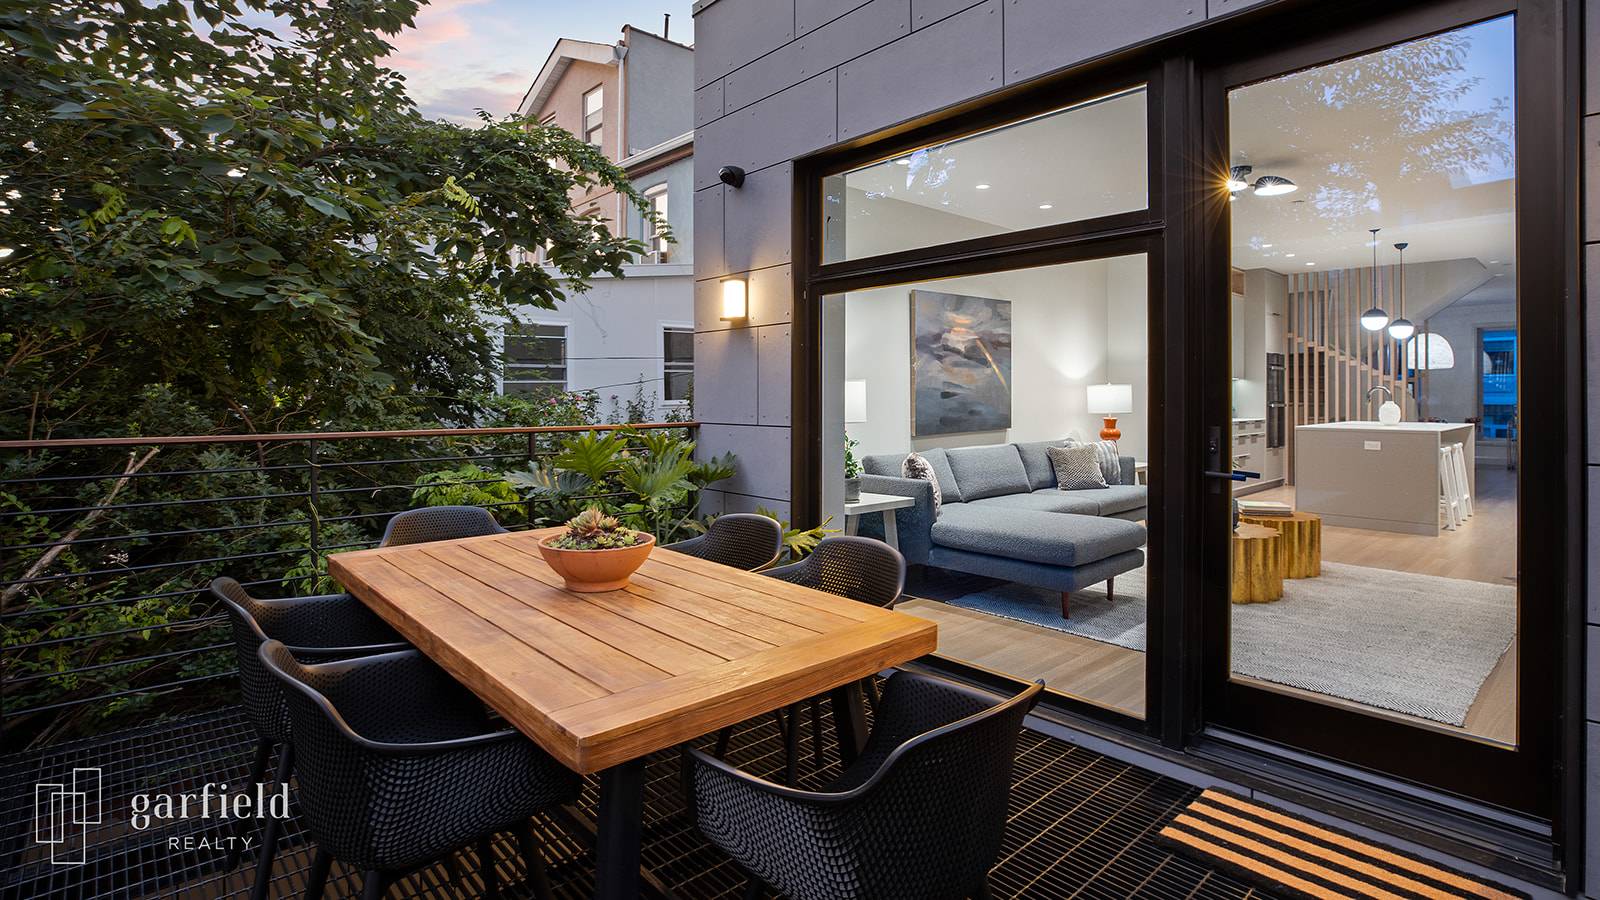 Put down roots in this gorgeous architect renovated 4 bedroom, 2.